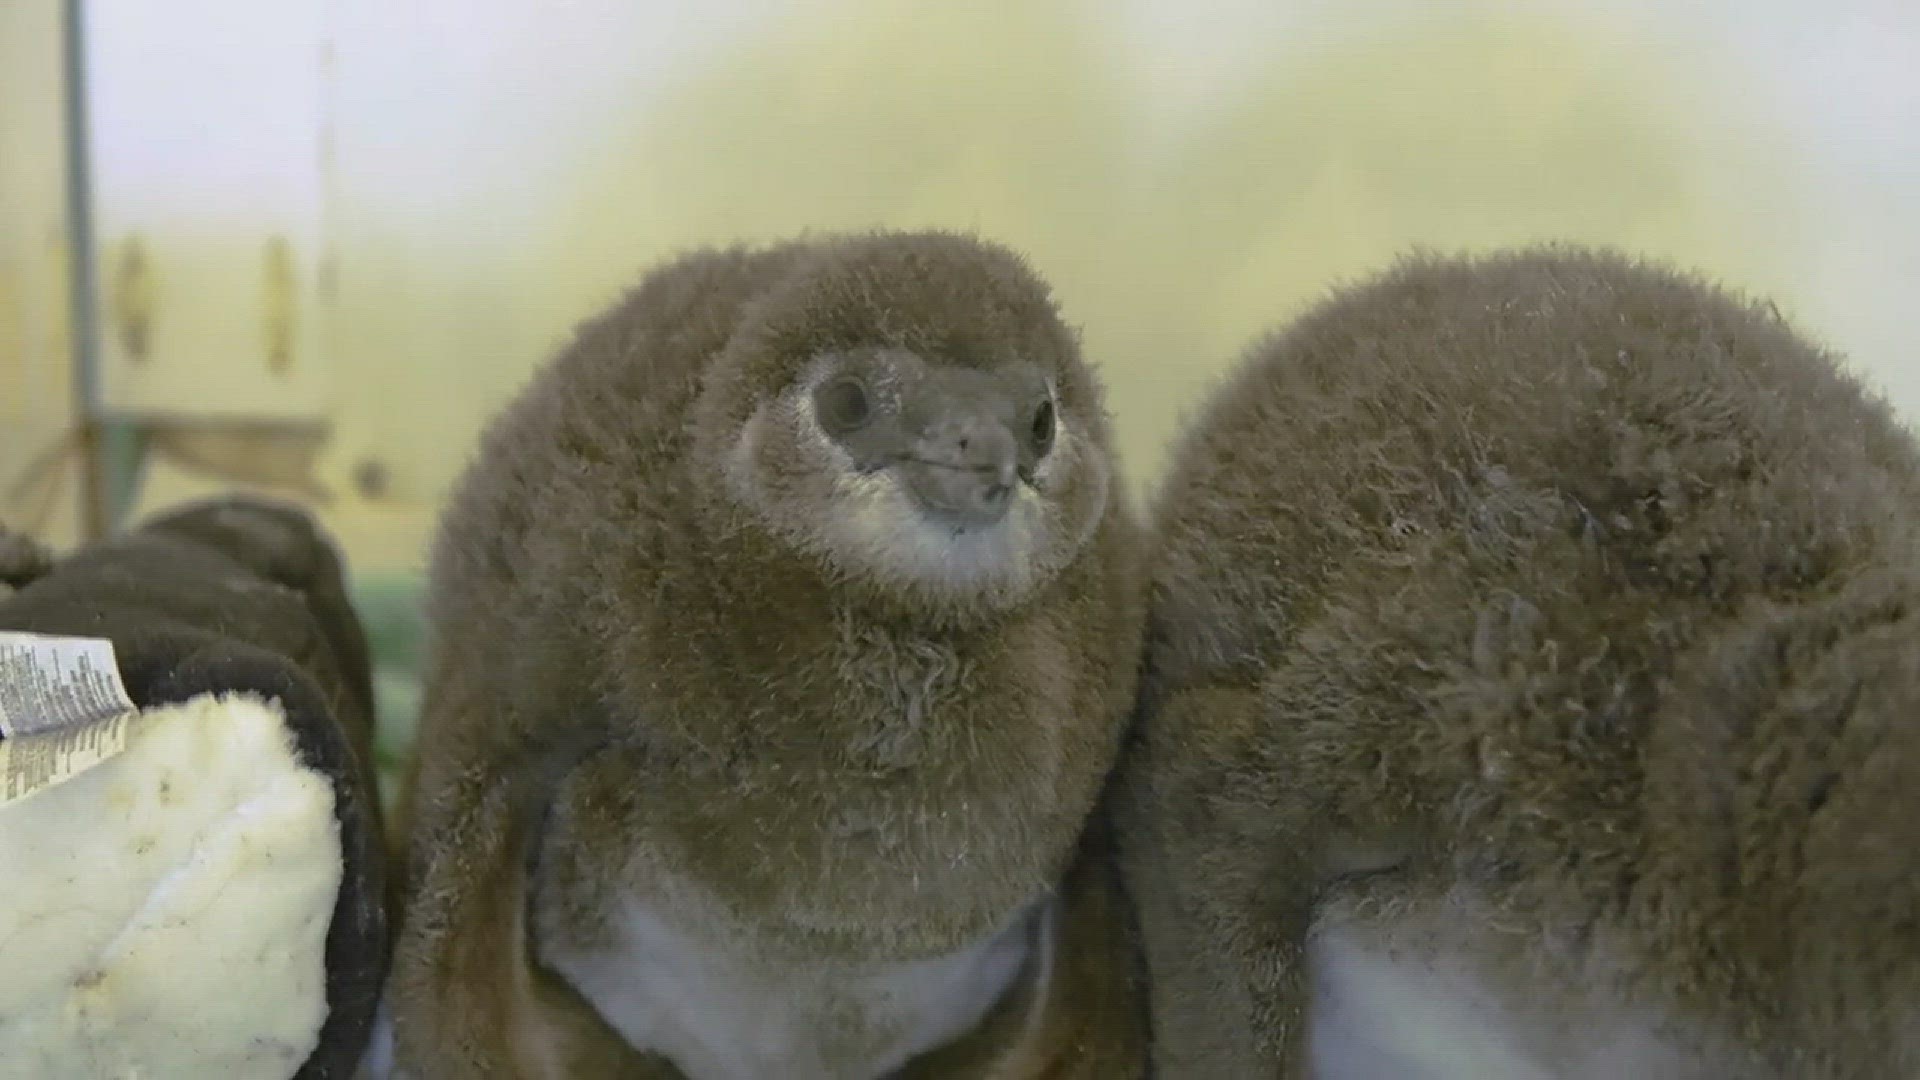 Two of the penguins were born from parents Haley and Glen, and a third was born from parents Nick and Doza. The aquarium said all three are doing well and are being monitored around the clock by the Ripley Husbandry team. Video from: Ripley's